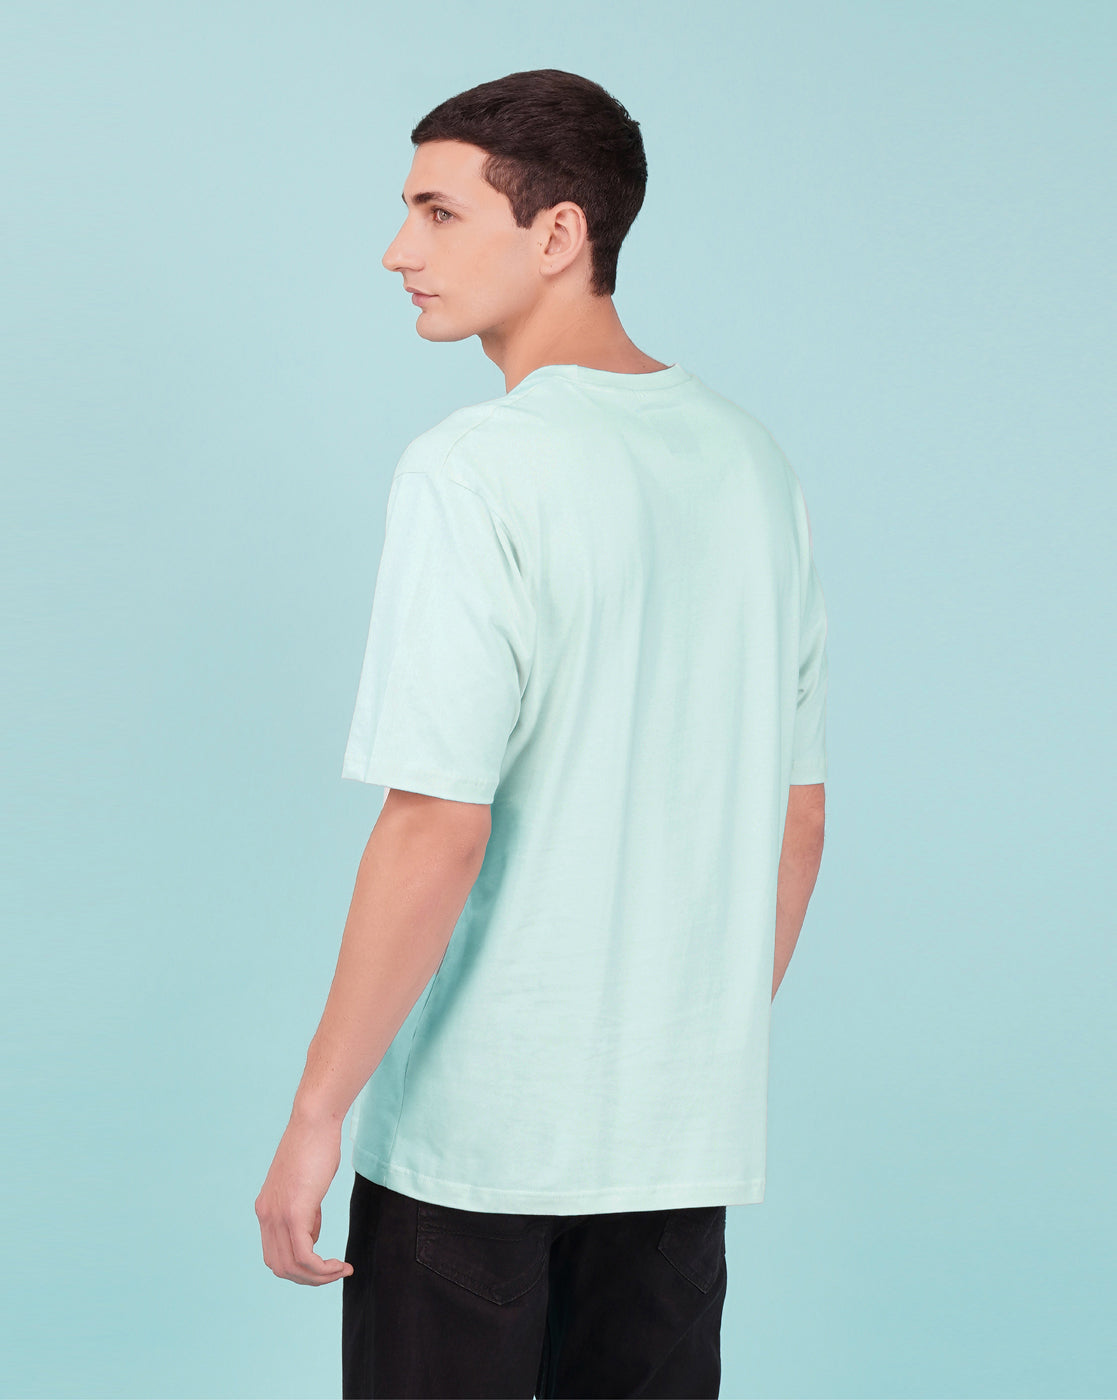 Nusyl Powder Blue Abstract Printed oversized t-shirt